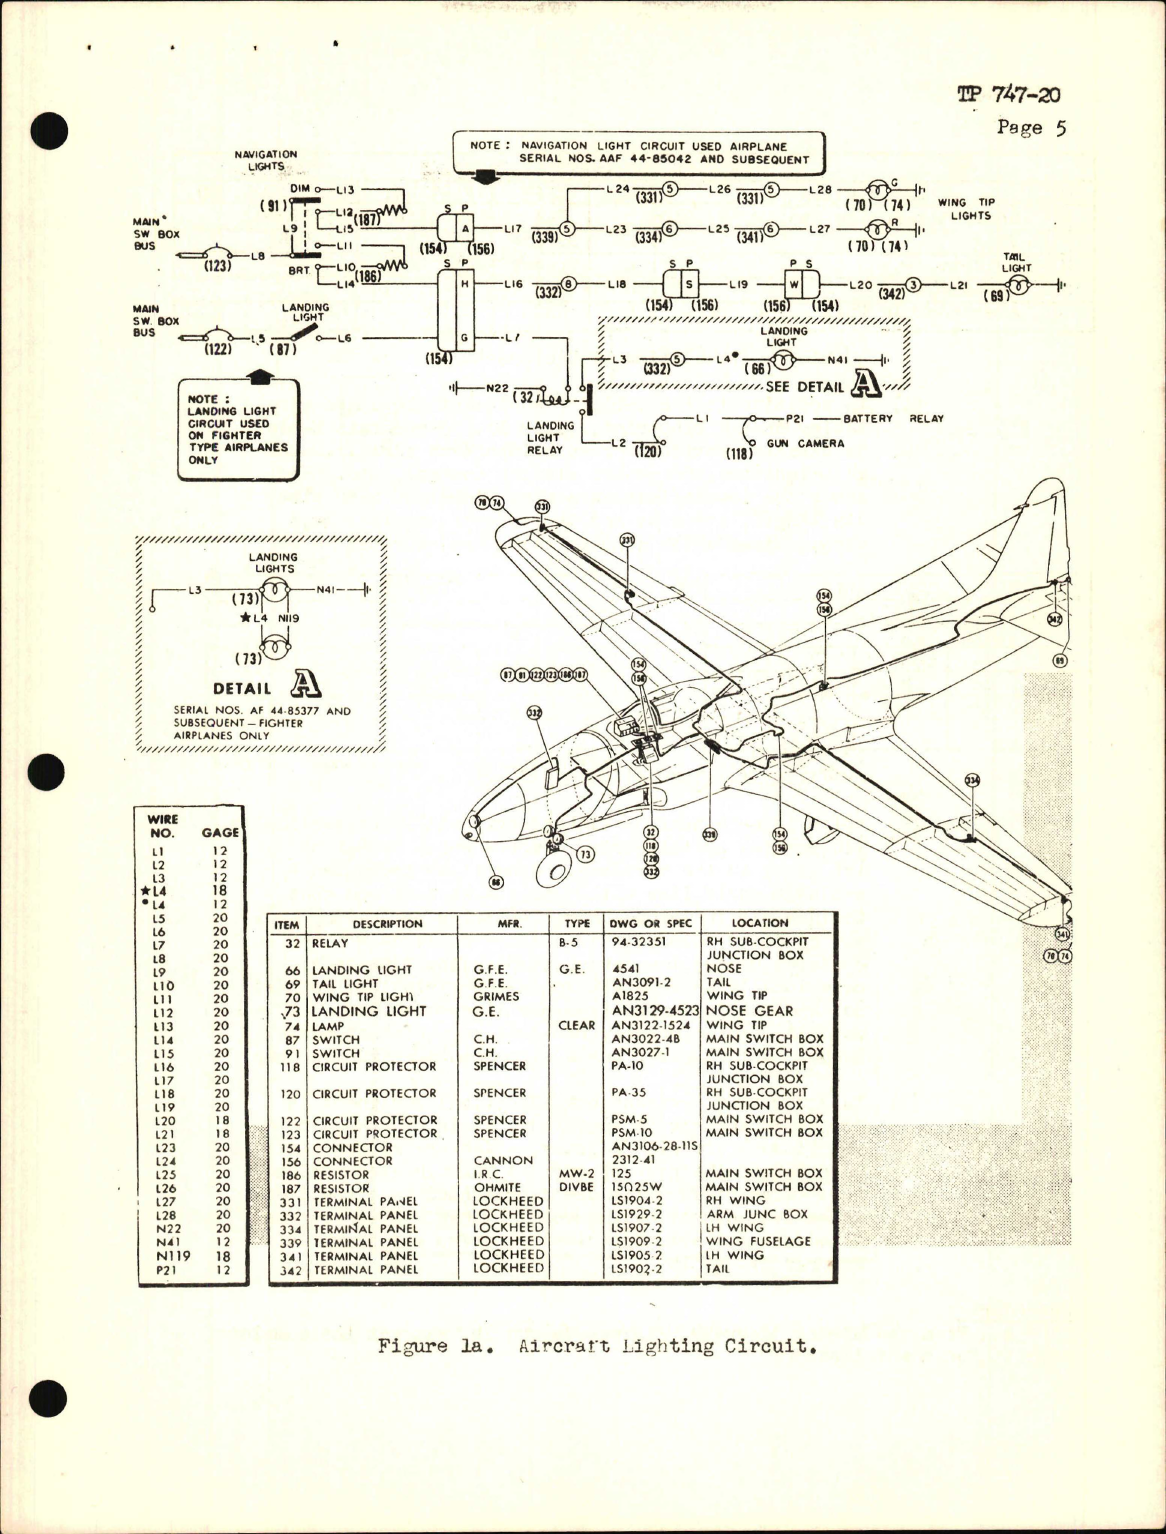 Sample page 5 from AirCorps Library document: Training Project, Lighting Systems, Blue Print Reading, Trouble Shooting